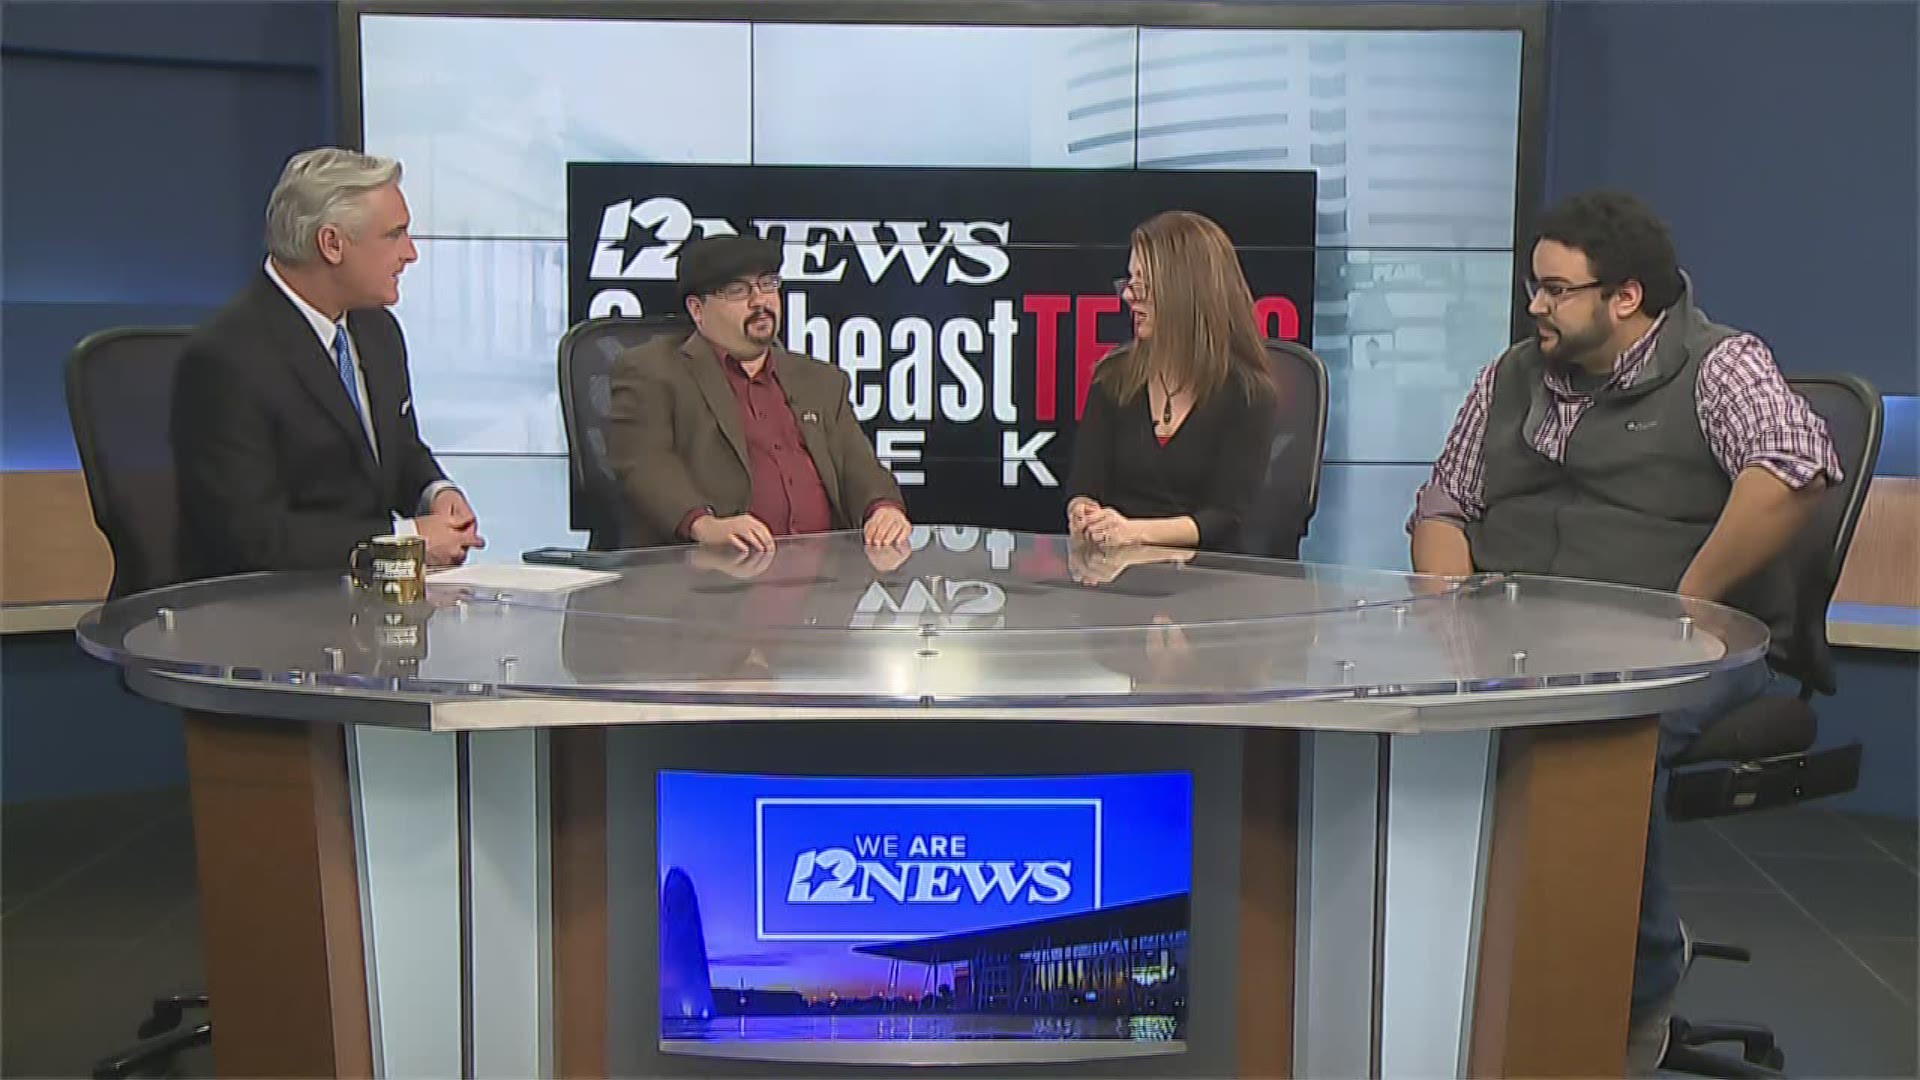 Southeast Texas Weekly is a political round table featuring Southeast Texans. 12News' Kevin Steele hosts along with guests, Michael Lindsay, Kent Batman, Jeff Lewis, Louis Ackerman, Kristy Wendler, David Covey & Fernando Ramirez